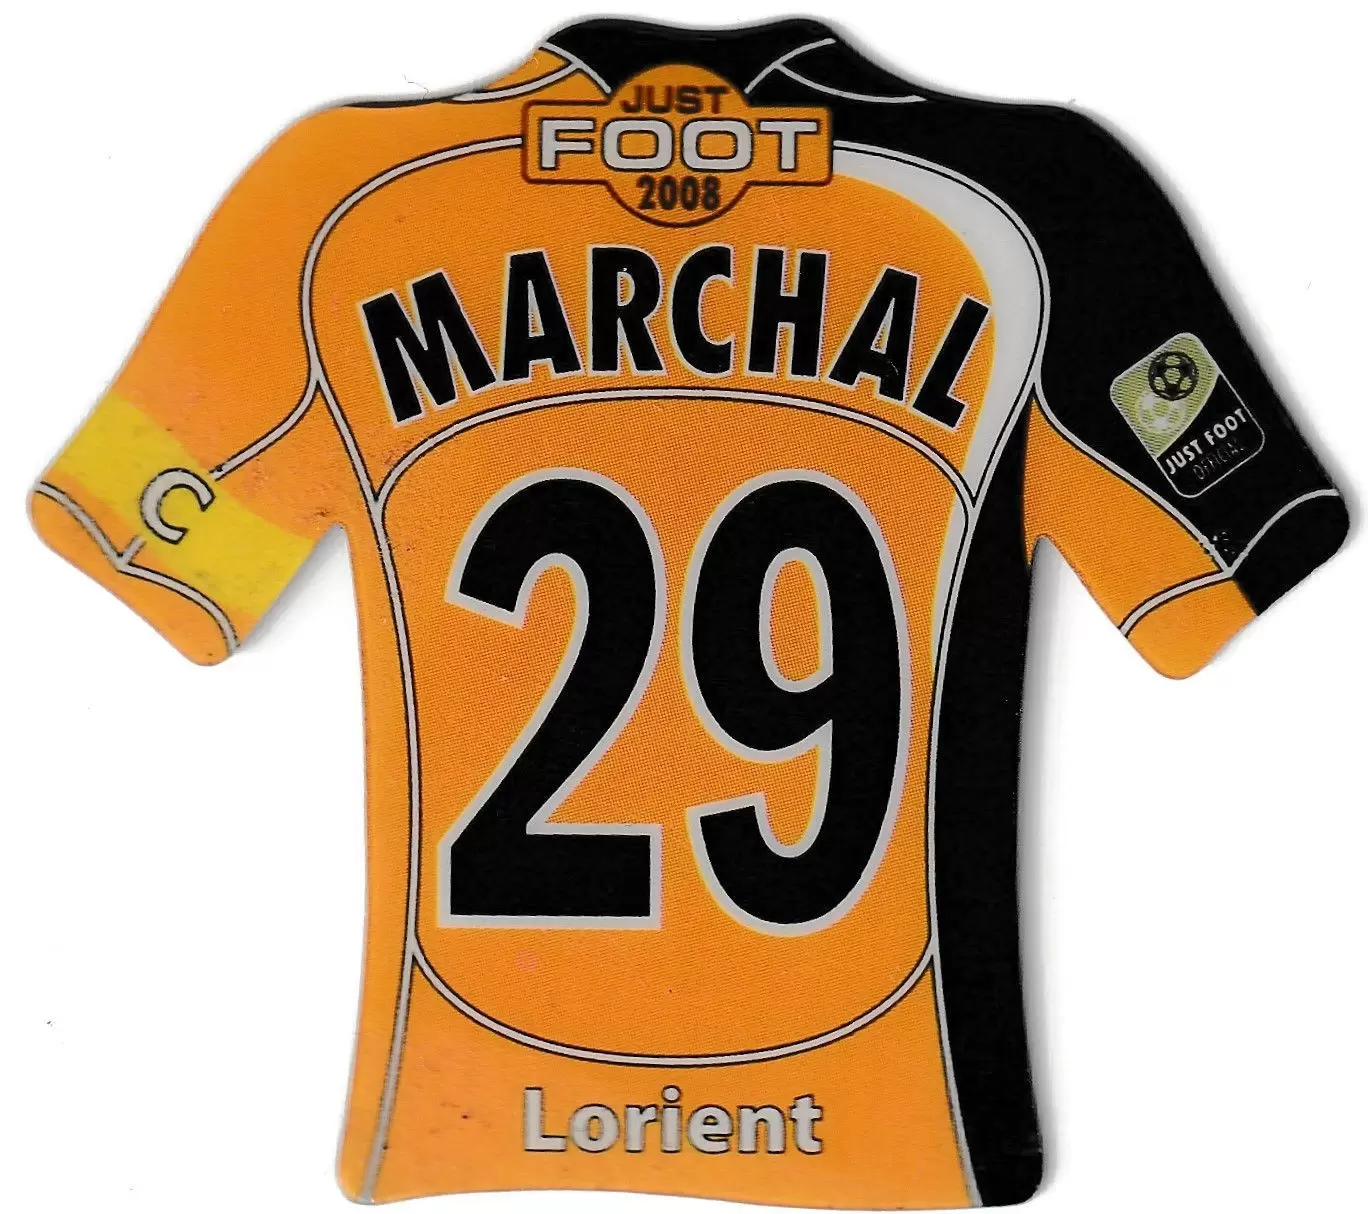 Just Foot 2008 - Lorient 29 - Marchal